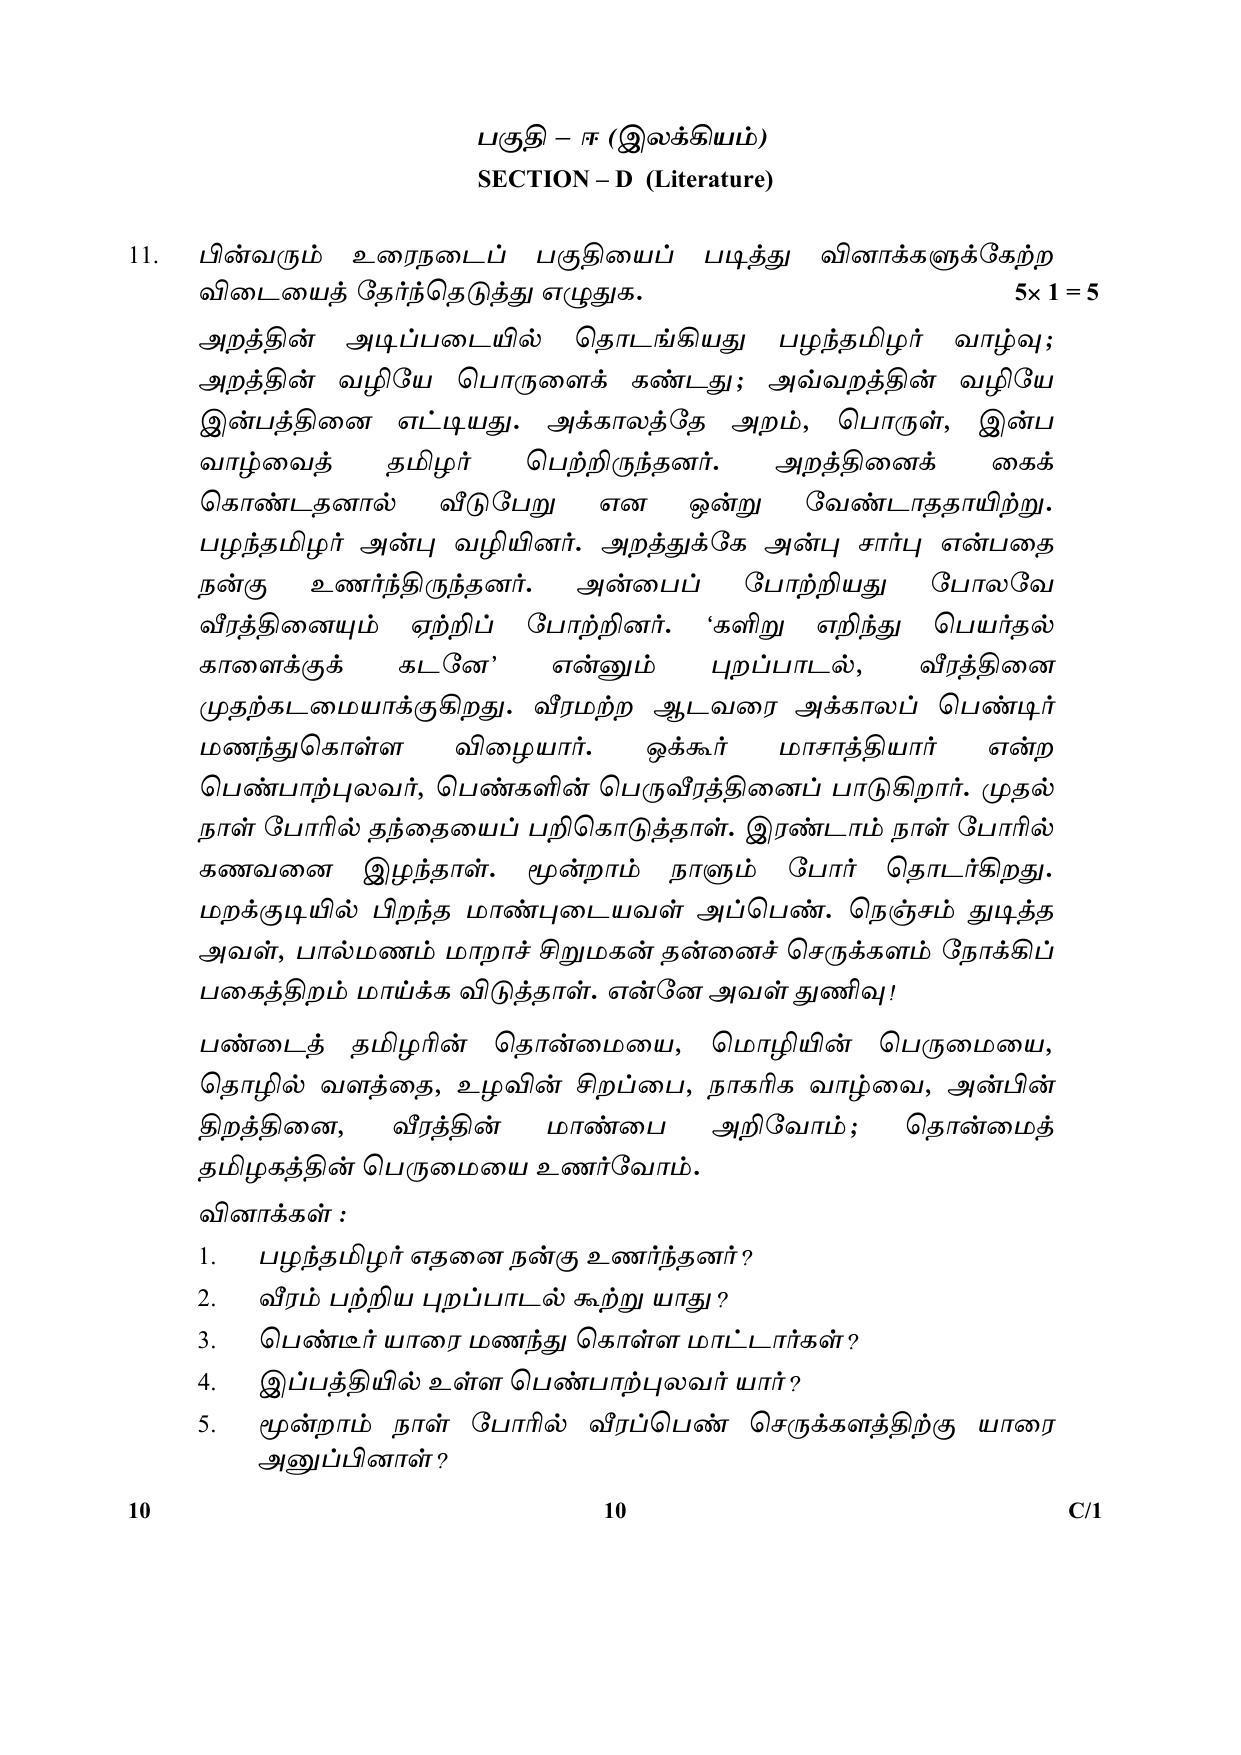 CBSE Class 10 10 (Tamil) 2018 Compartment Question Paper - Page 10